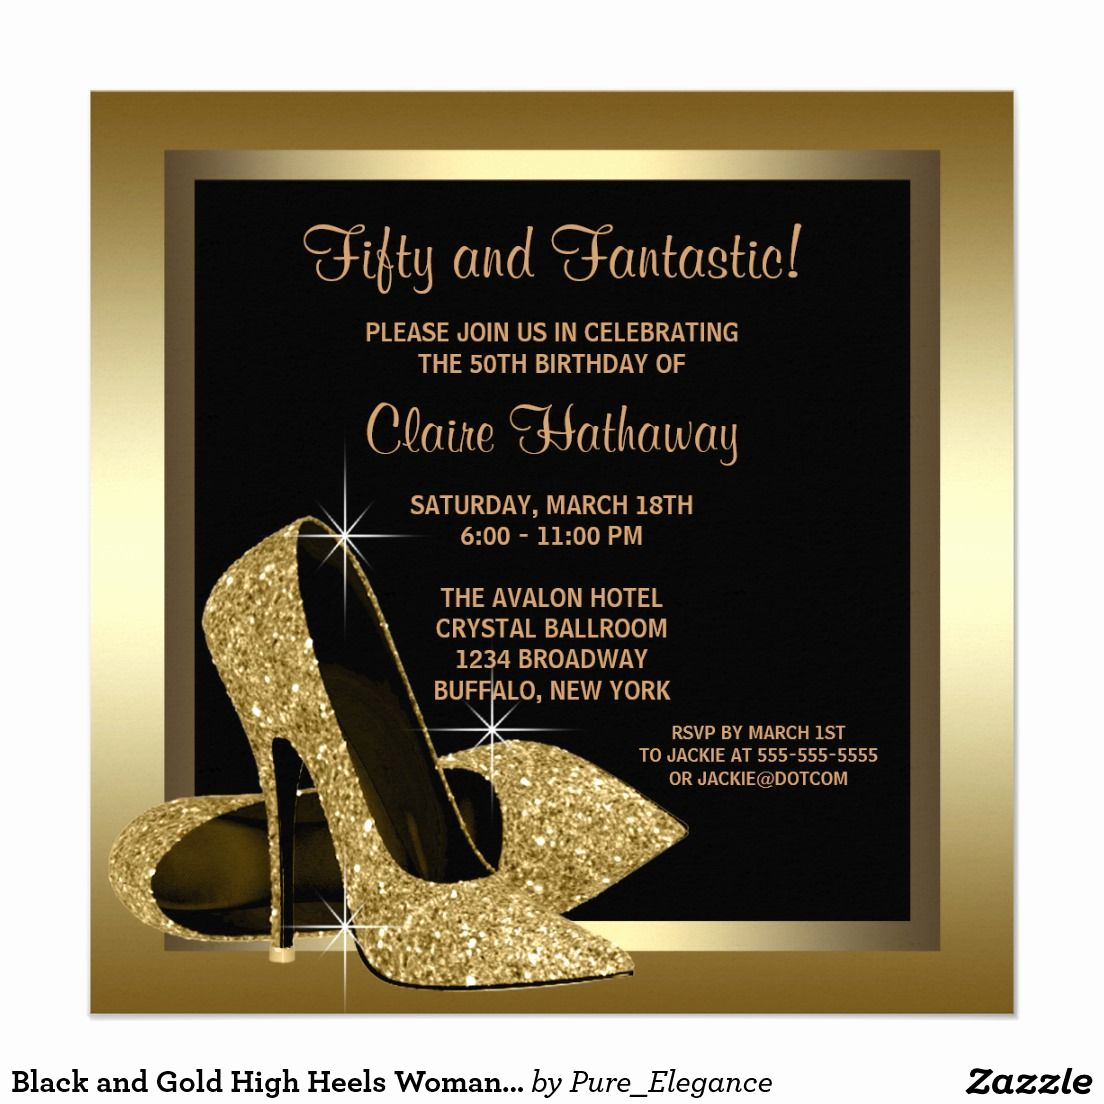 Black and Gold Invitation Awesome Black and Gold High Heels Womans 50th Birthday Card